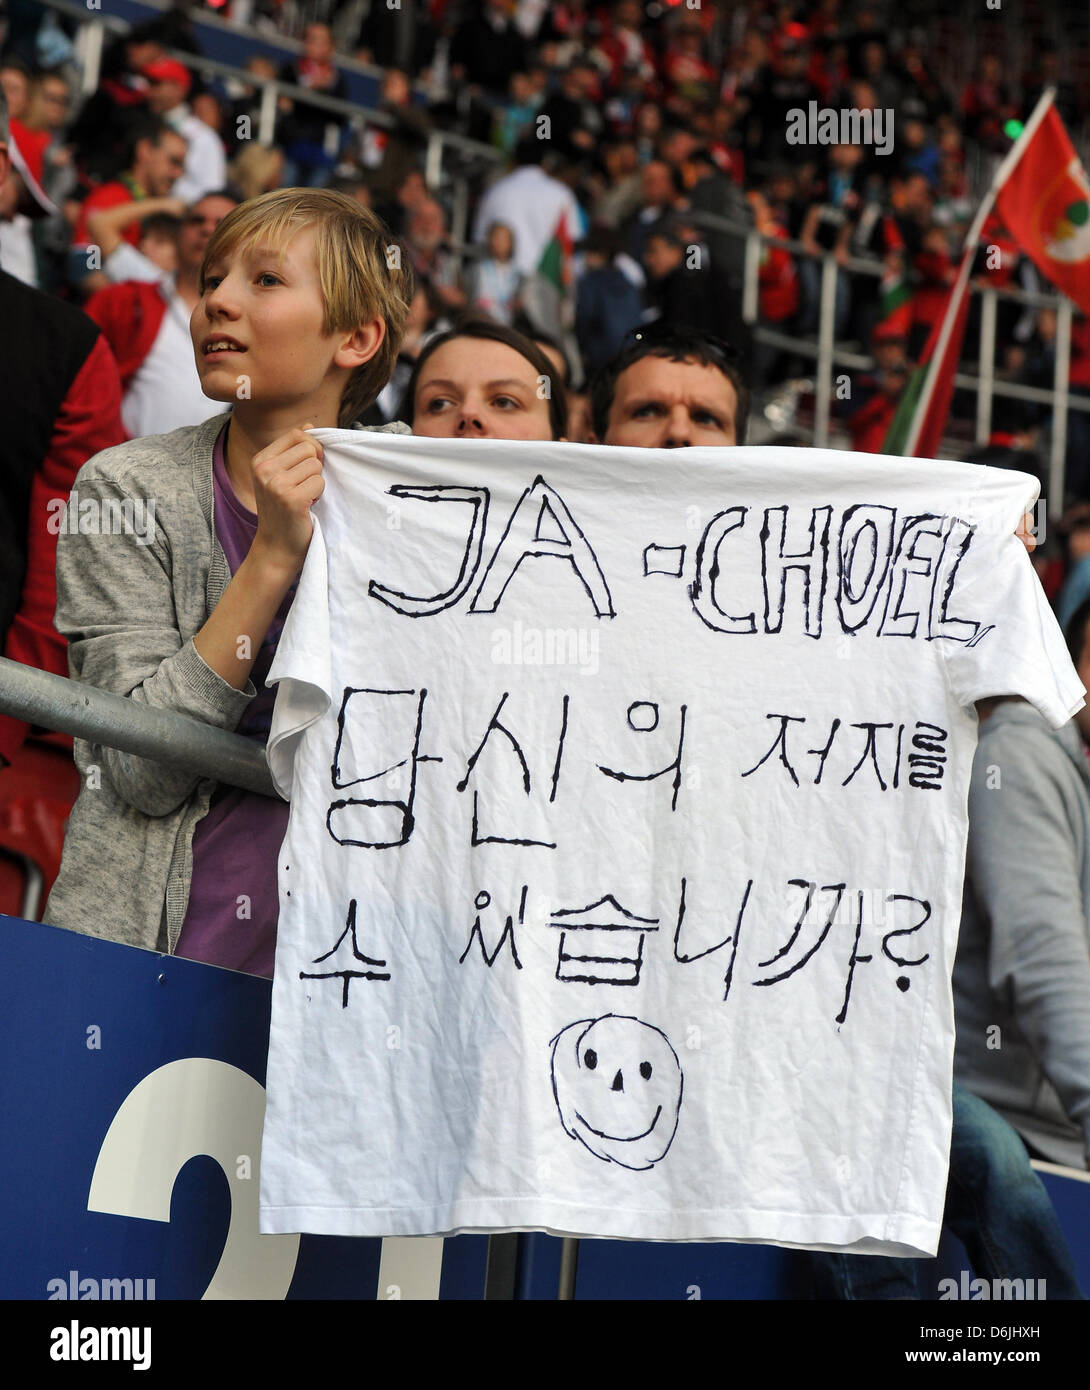 Augsburg's Ja-Cheol Koo is greeted by fans during the Bundesliga match FC Augsburg versus  1.FSV Mainz 05 at SGL-Arena in Augsburg, Germany, 17 March 2012. Augsburg won 2-1. Photo: Stefan Puchner Stock Photo